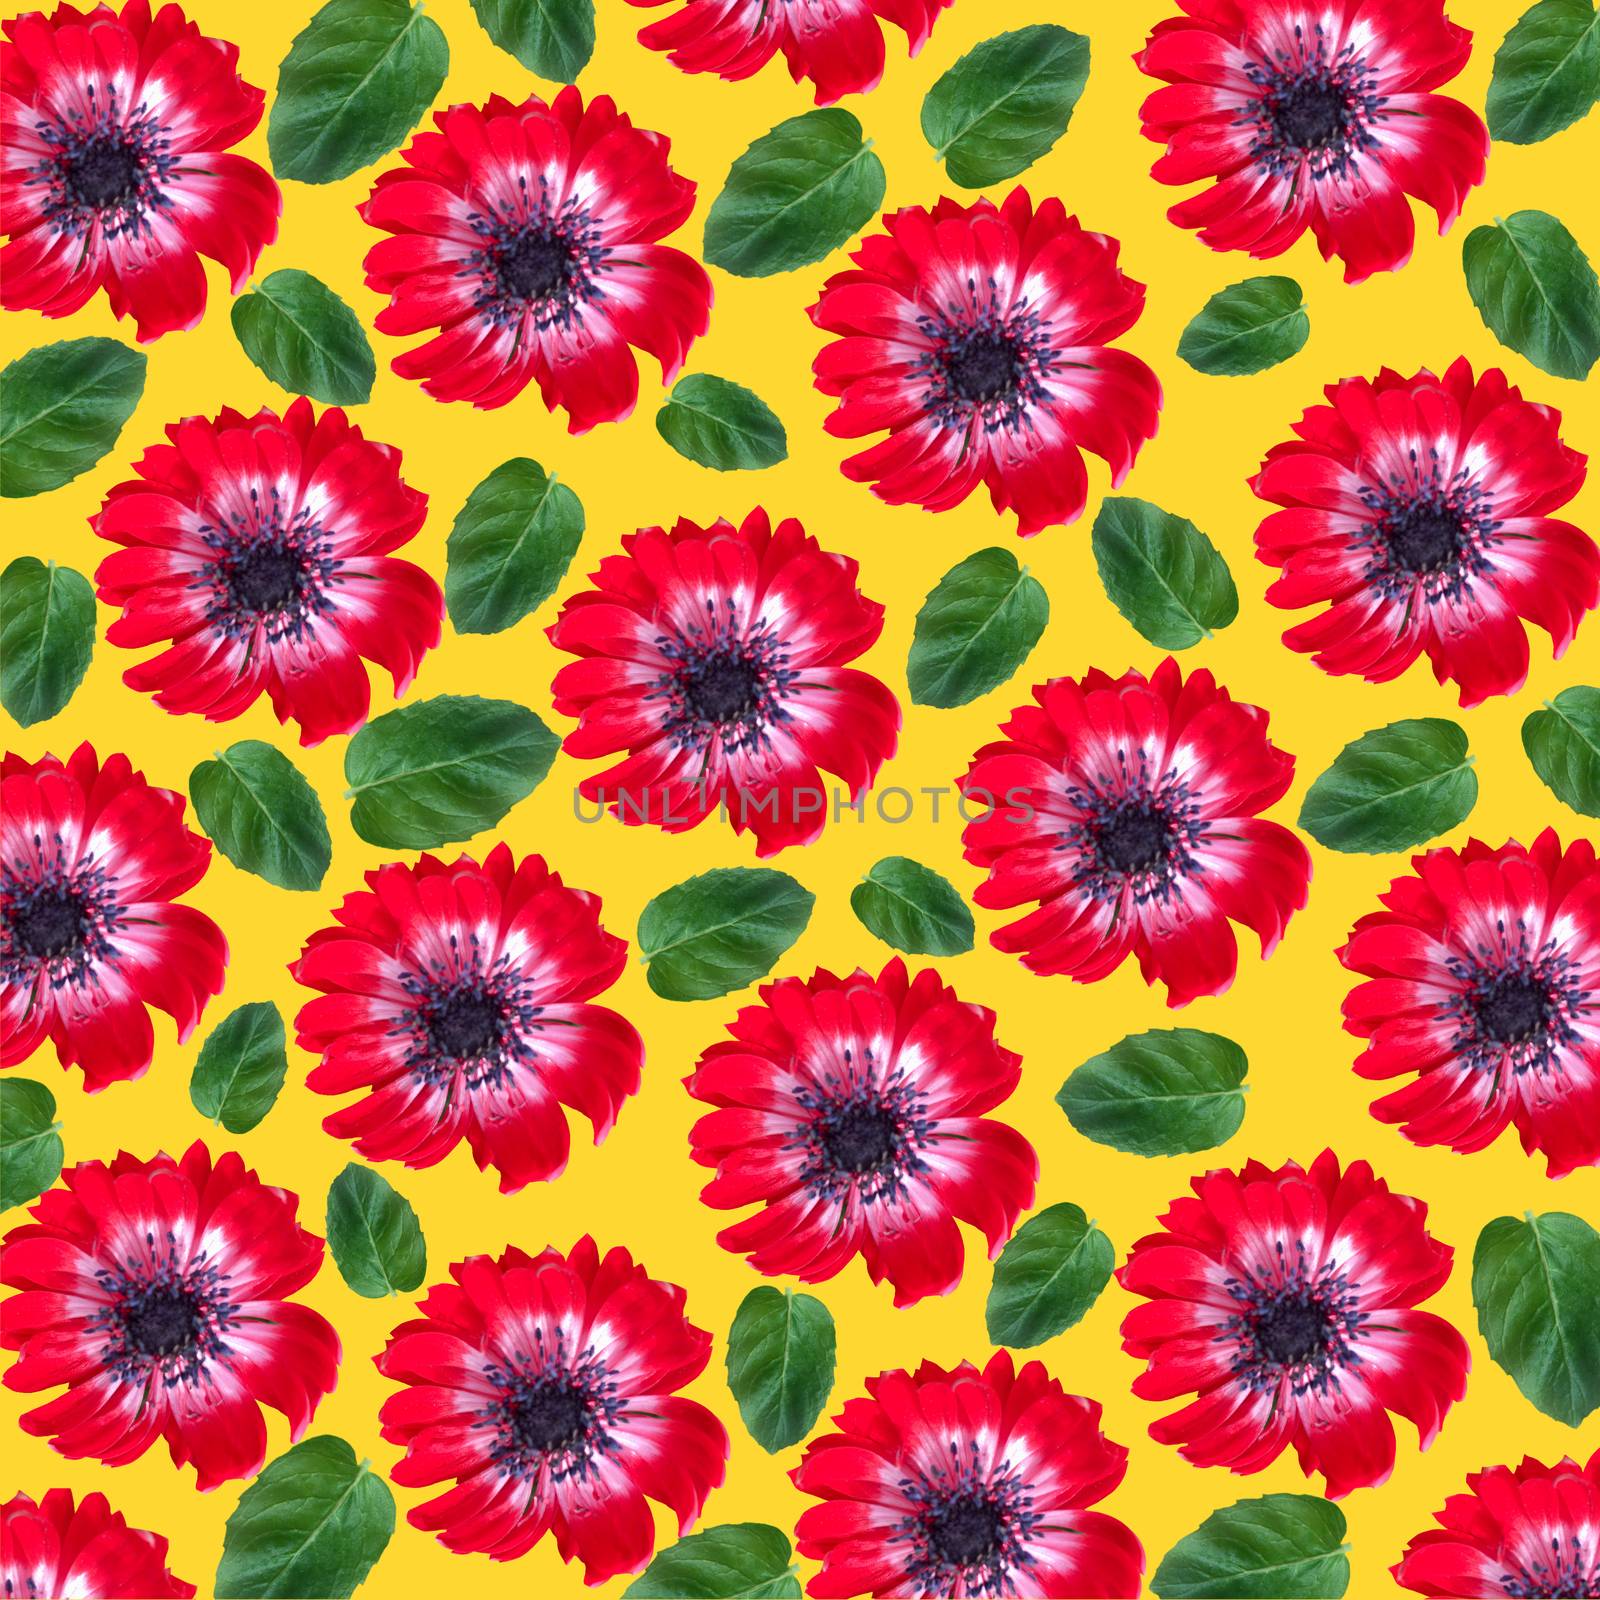 Floral pattern with red flowers and mint leaves by Margolana